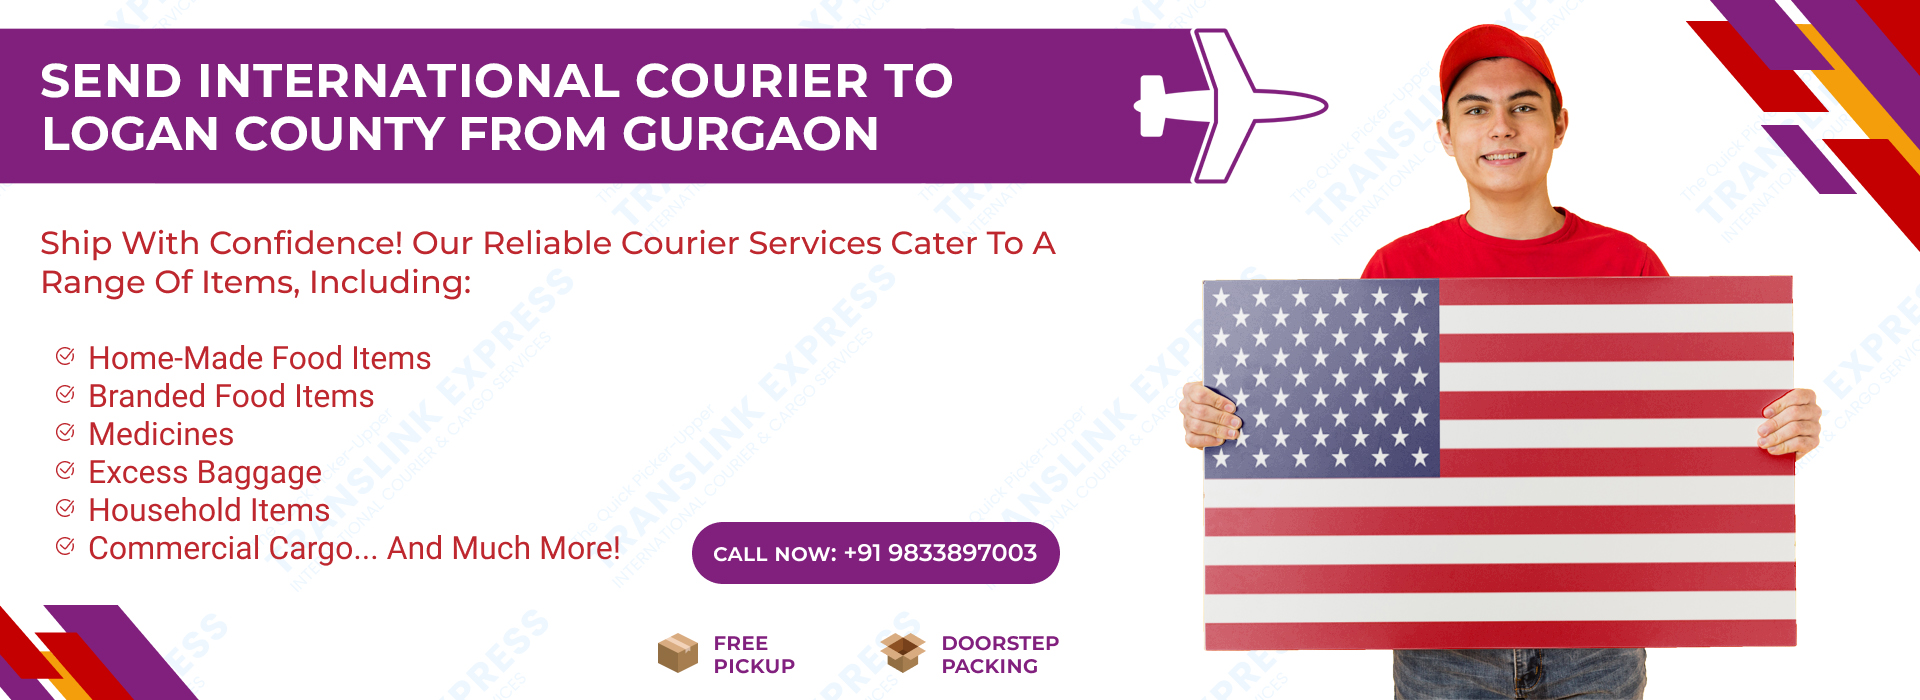 Courier to Logan County From Gurgaon